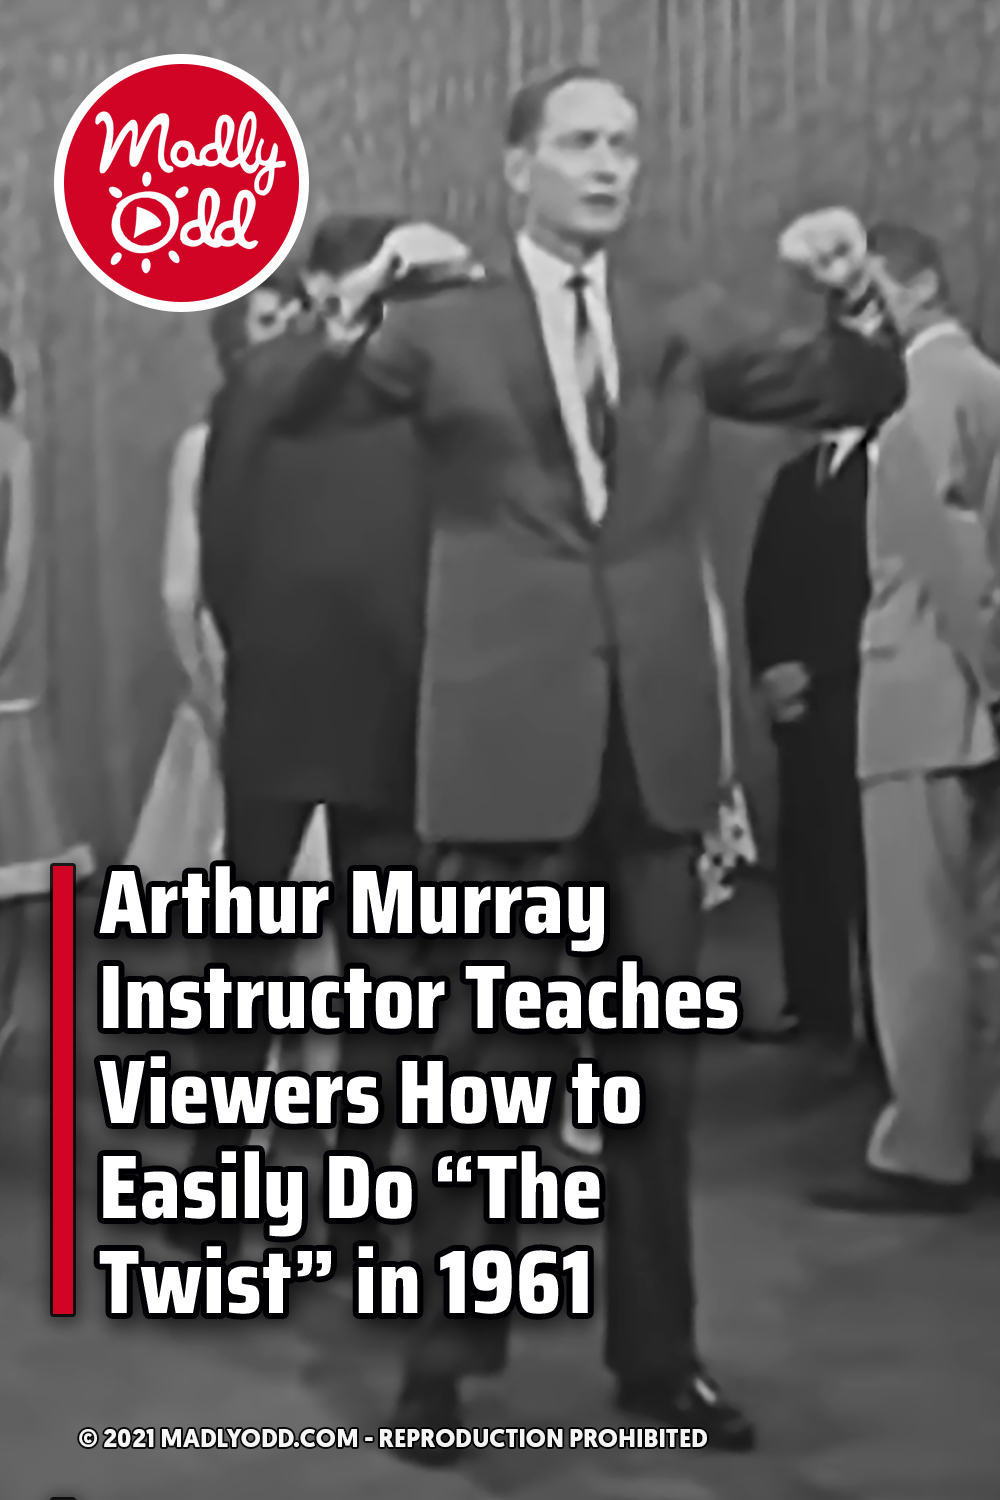 Arthur Murray Instructor Teaches Viewers How to Easily Do “The Twist” in 1961